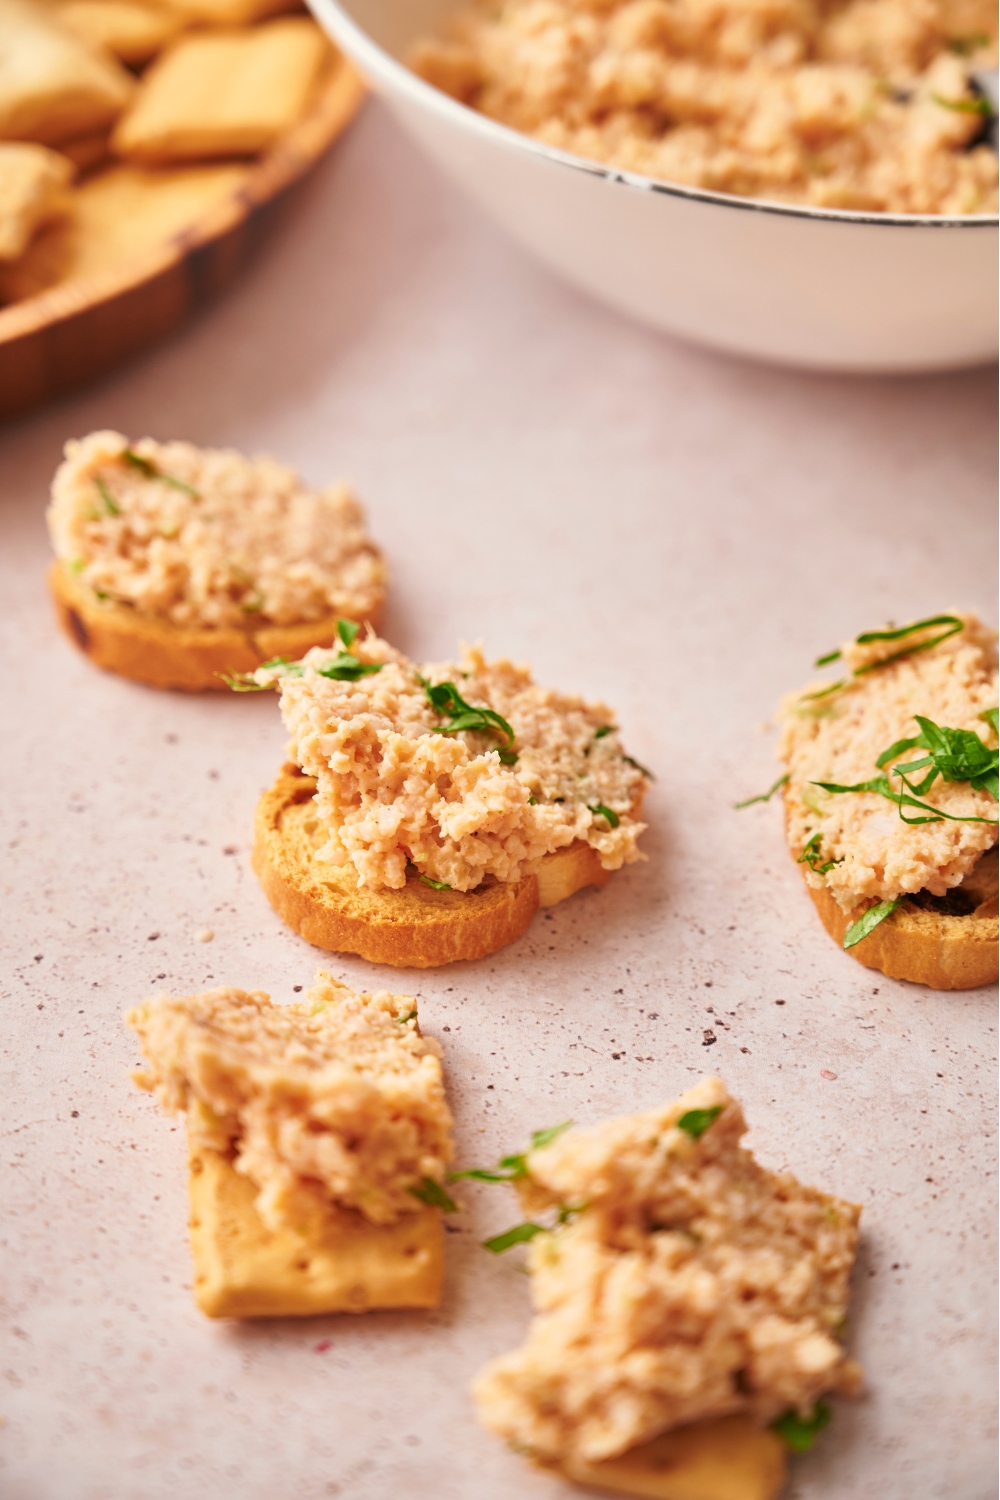 An assortment of bread and crackers topped with deviled ham and garnished with fresh herbs.